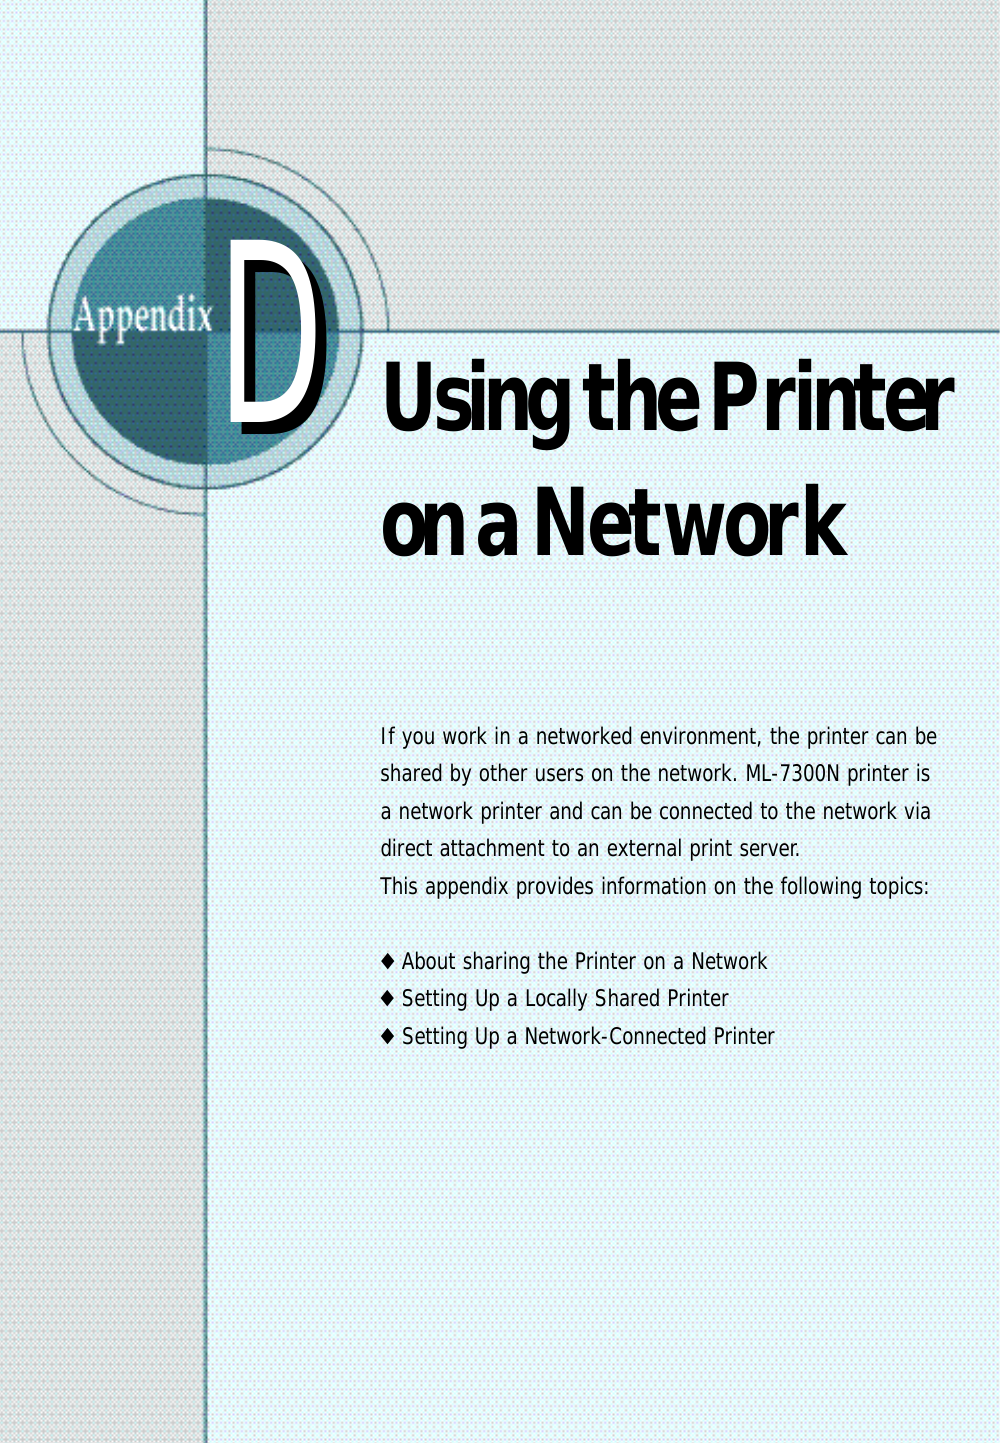 Using the Printero naNetworkIf you work in a networked environment, the printer can beshared by other users on the network. ML-7300N printer isa network printer and can be connected to the network viadirect attachment to an external print server.This appendix provides information on the following topics:◆About sharing the Printer on a Network◆Setting Up a Locally Shared Printer◆Setting Up a Network-Connected PrinterDD